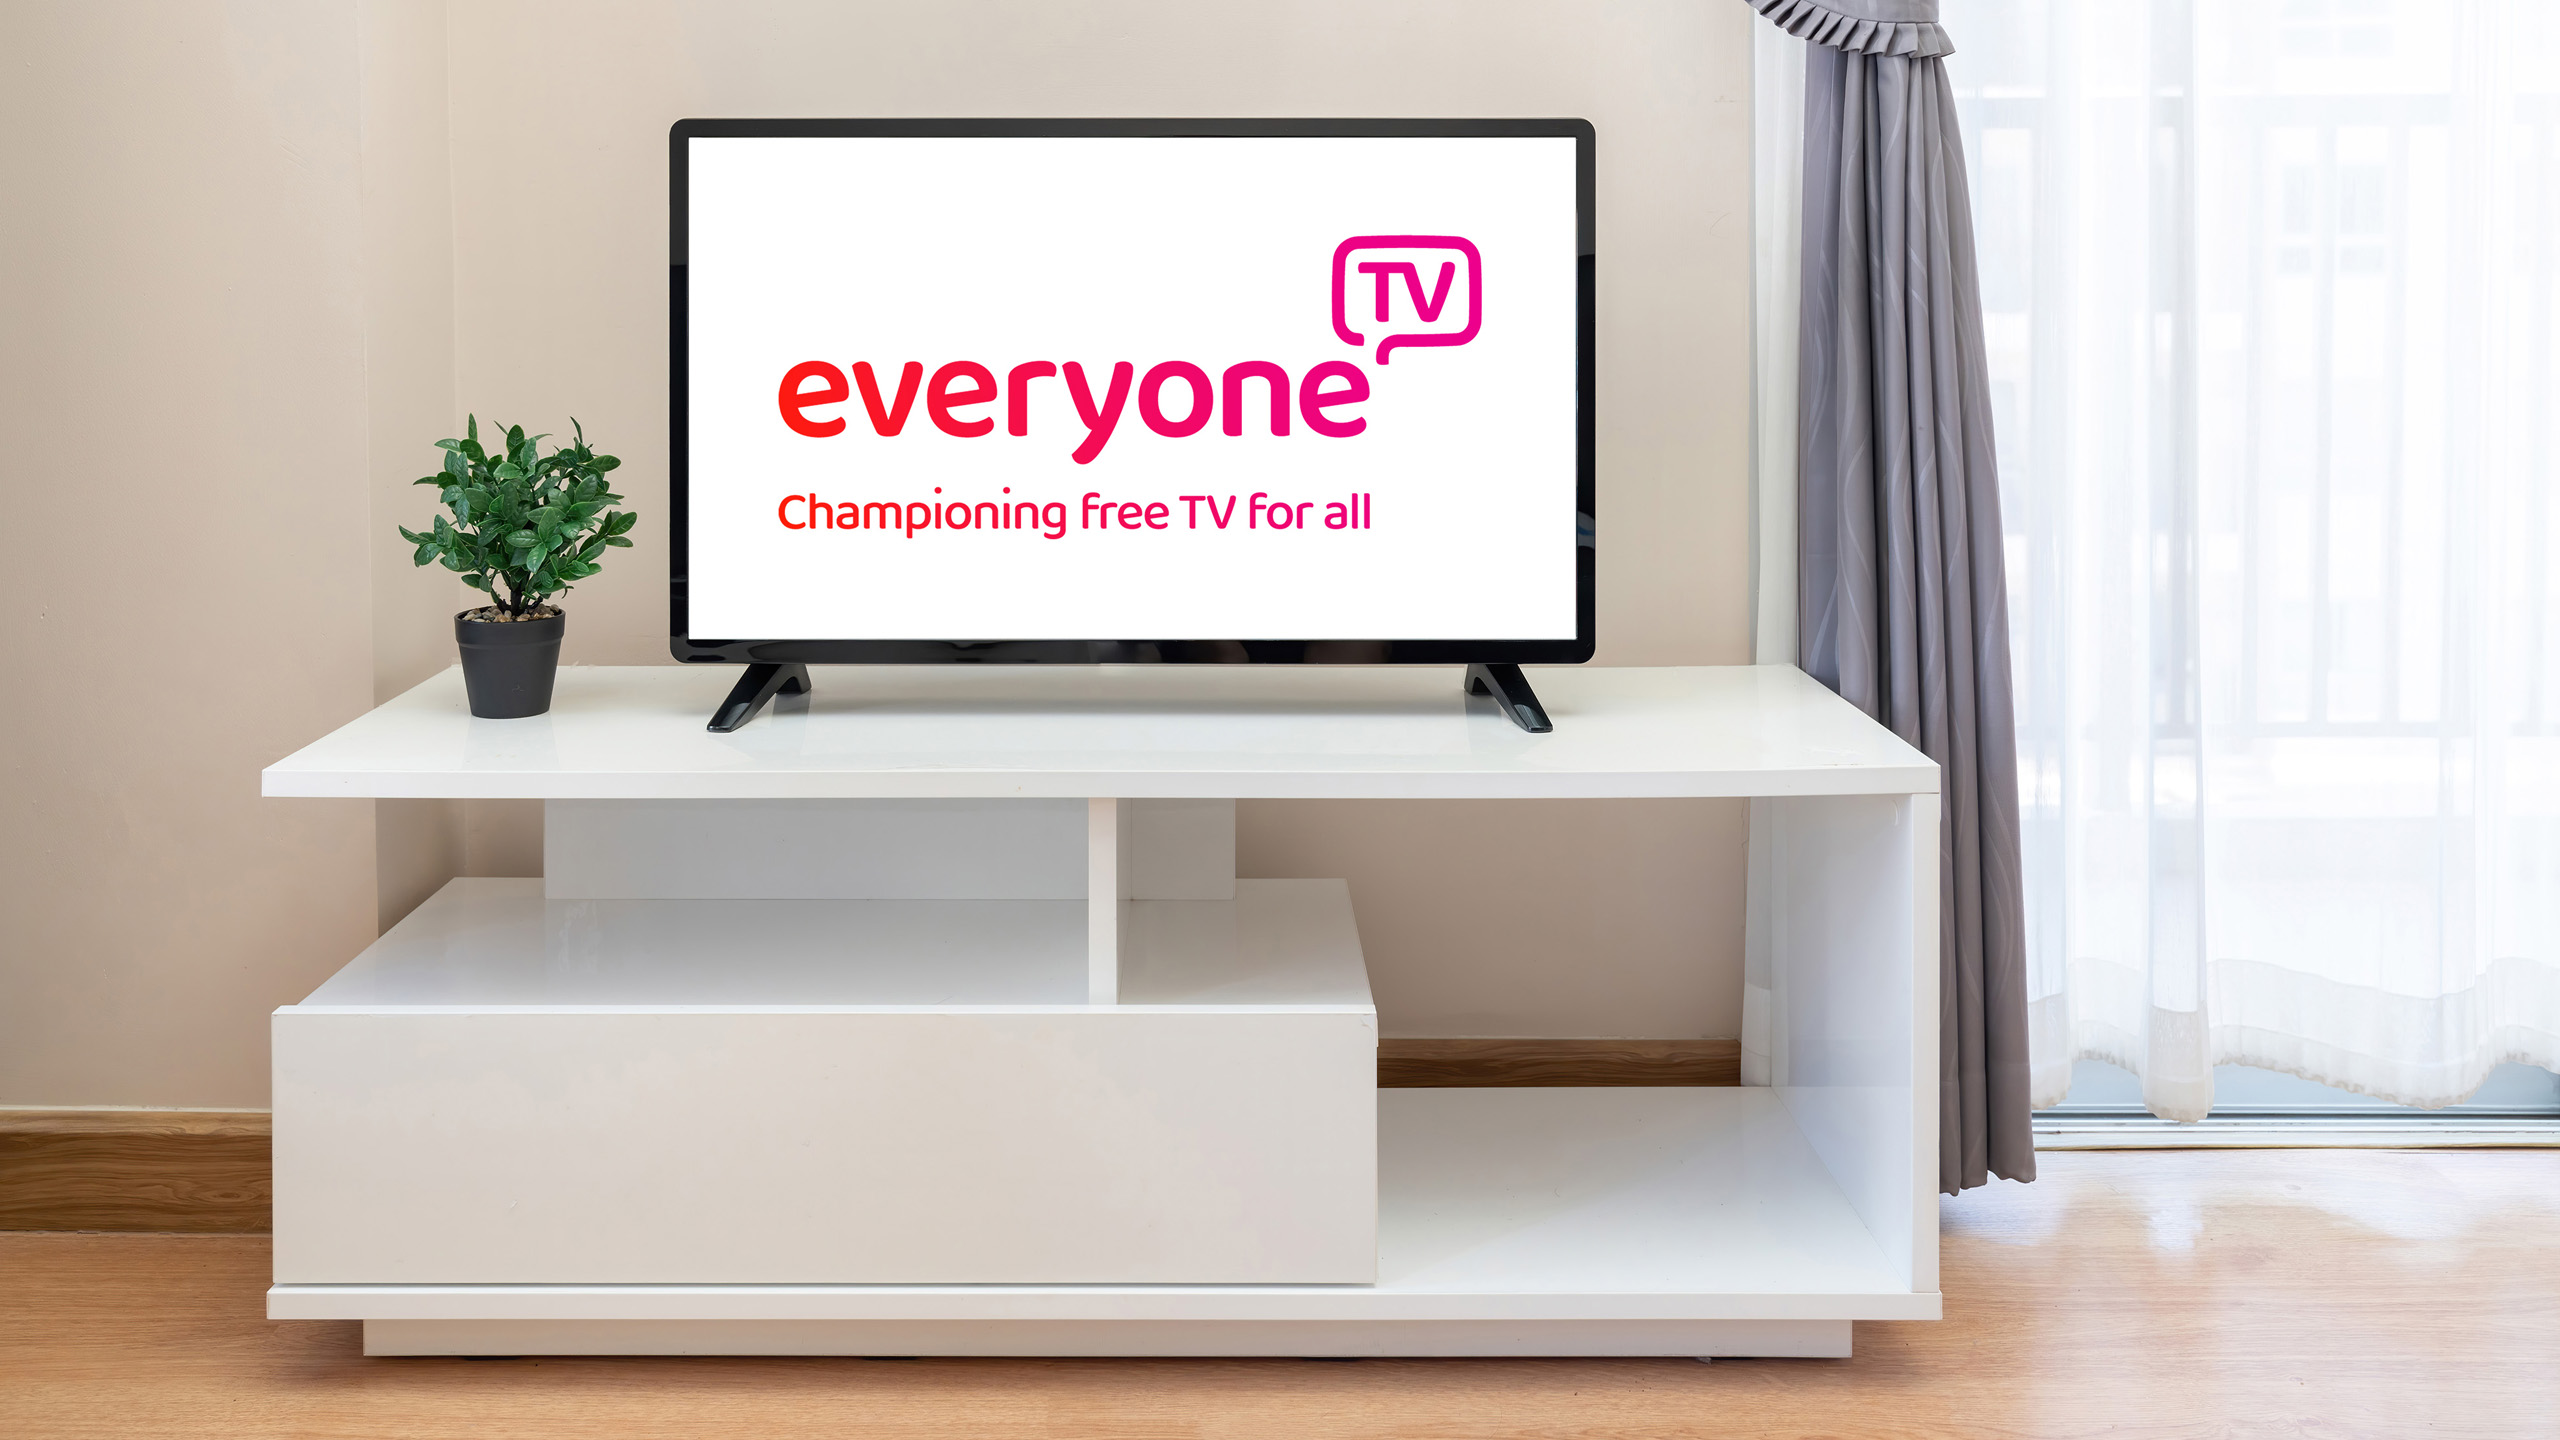 TV screen displaying message "Championing Free TV for all"